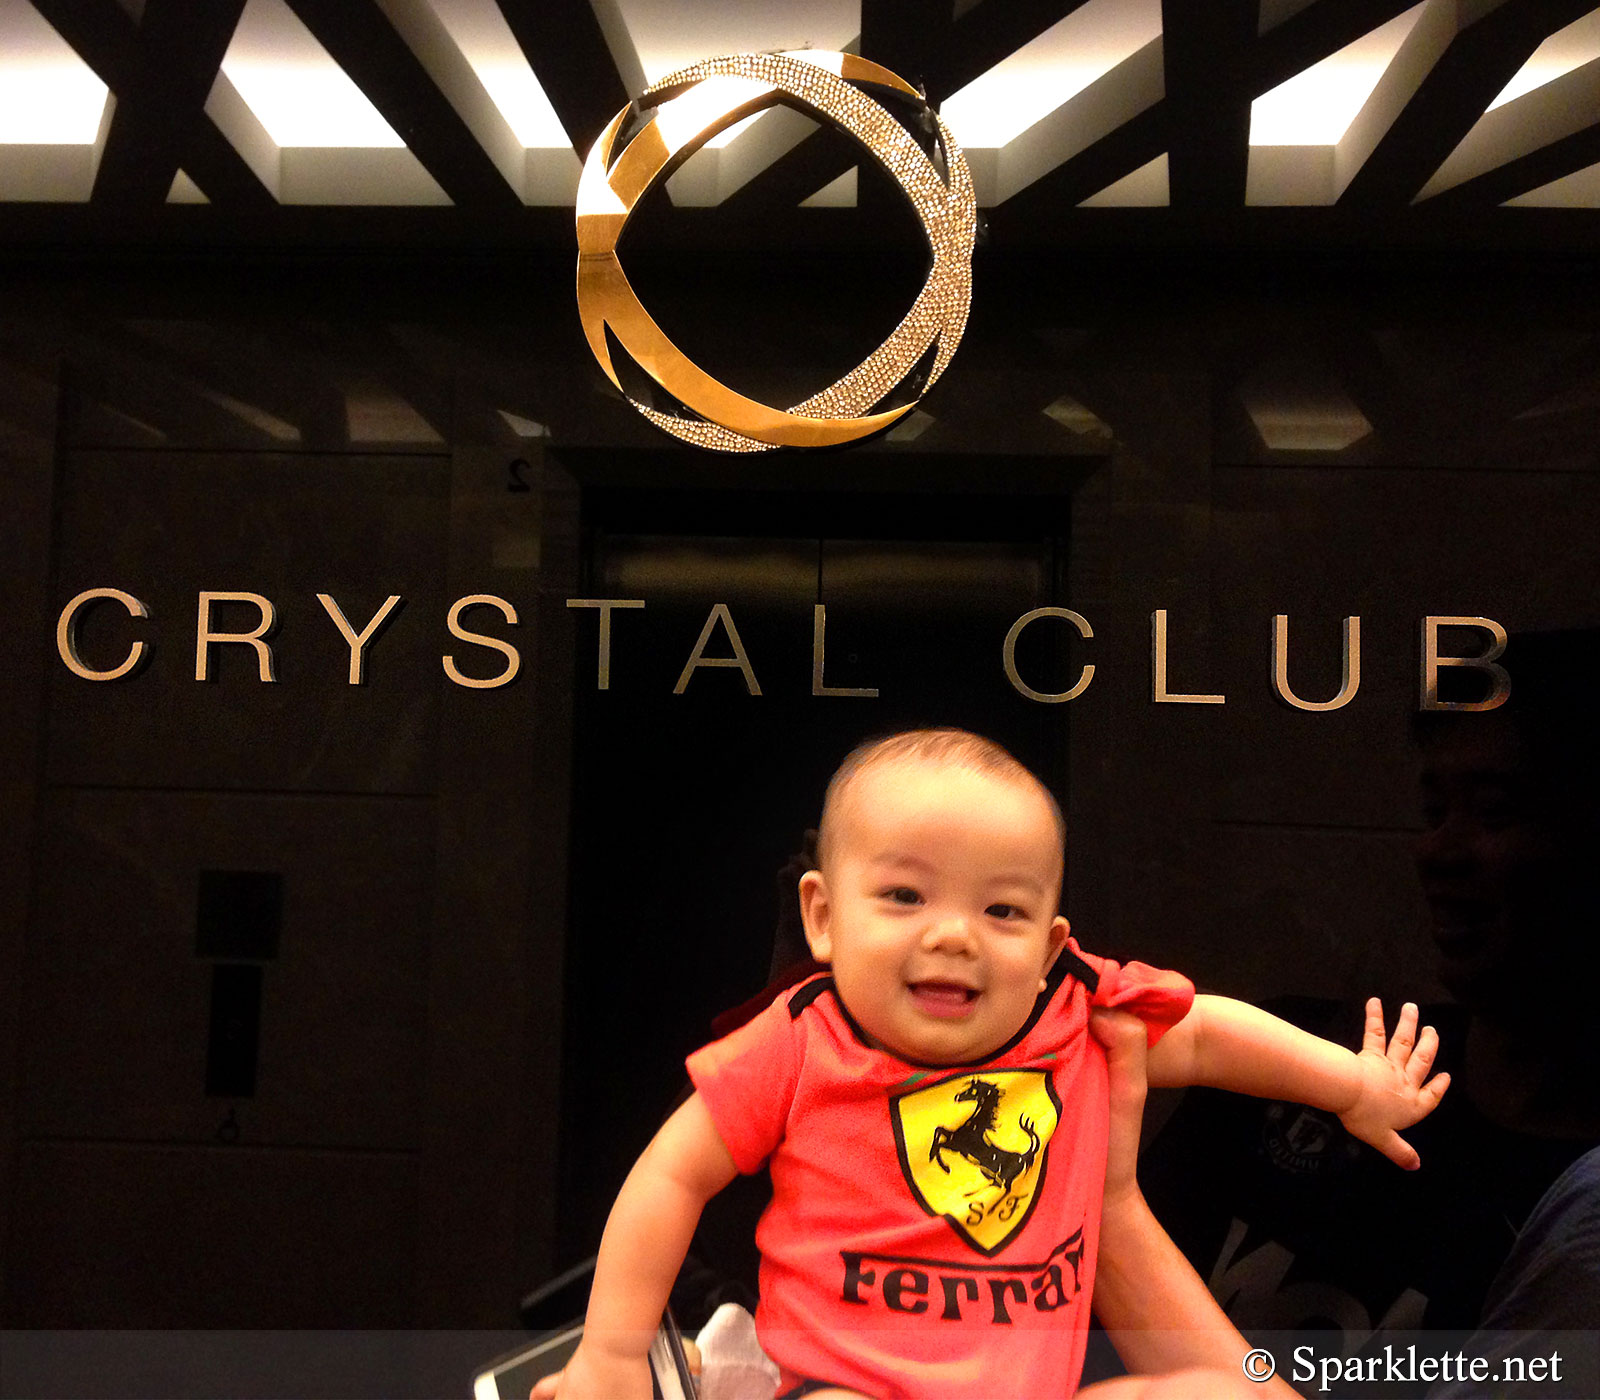 Baby Ethan at Park Hotel Clarke Quay